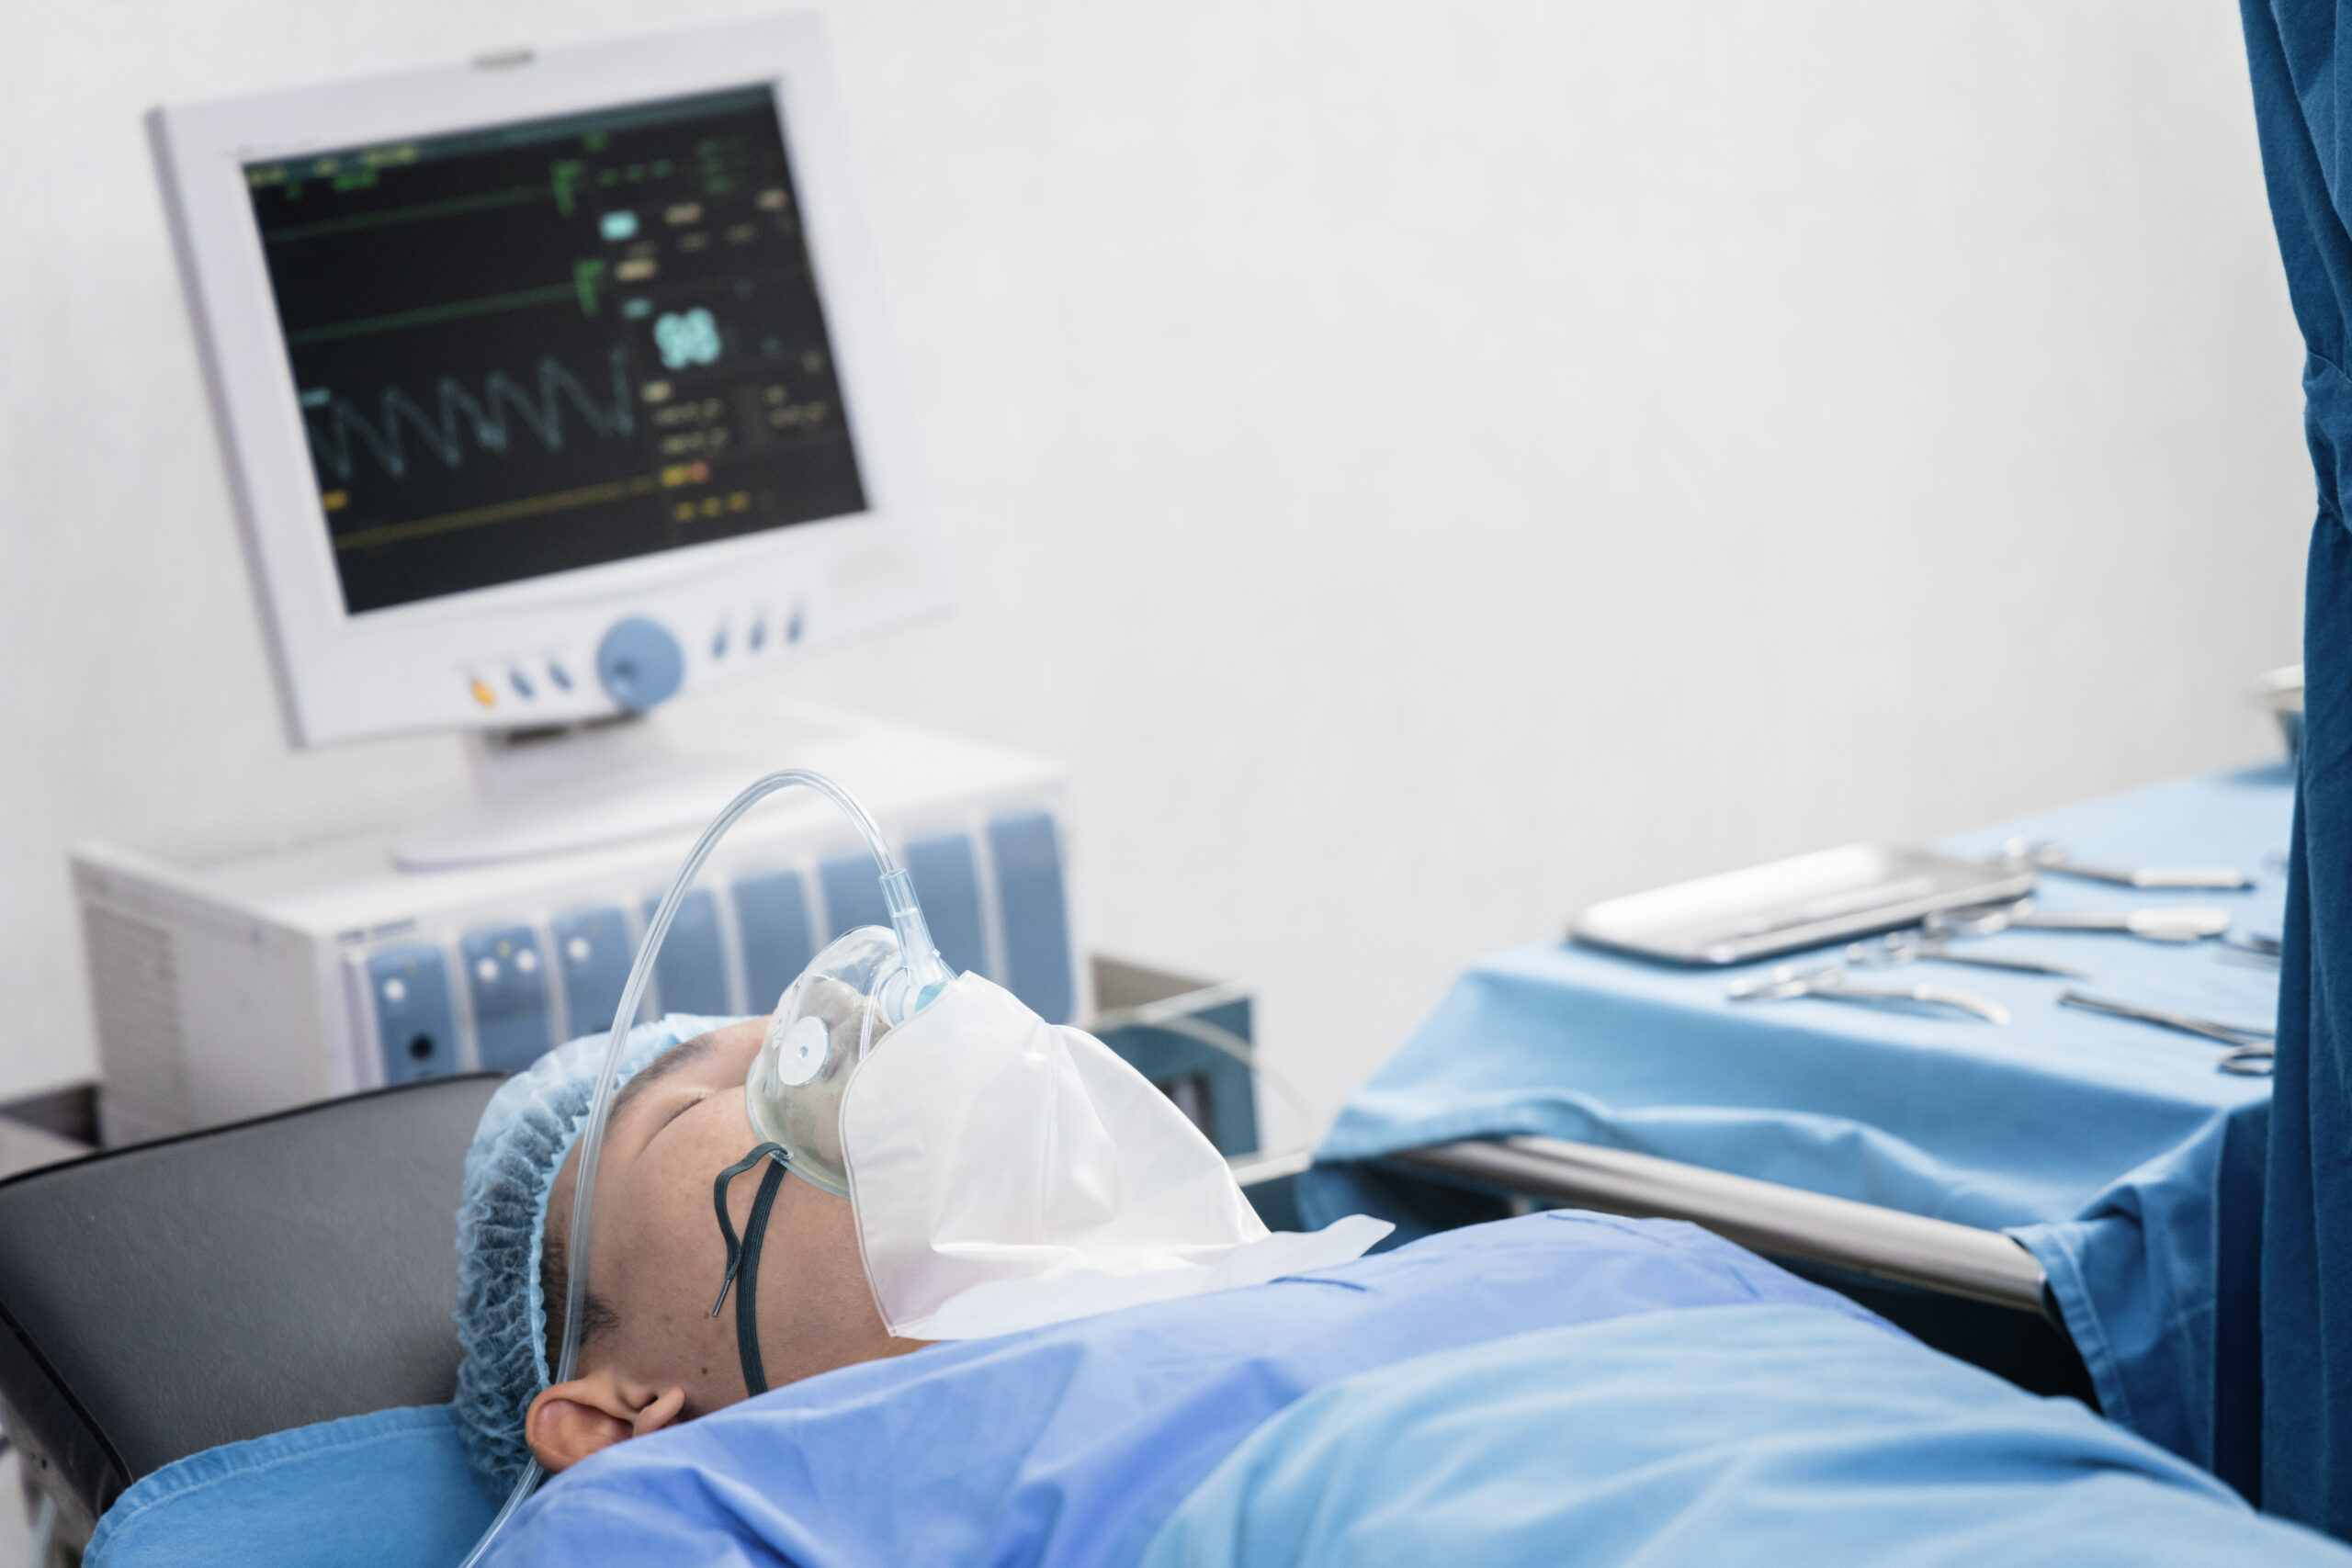 What Legal Recourses Are Available for Injuries Caused by Defective Medical Devices?